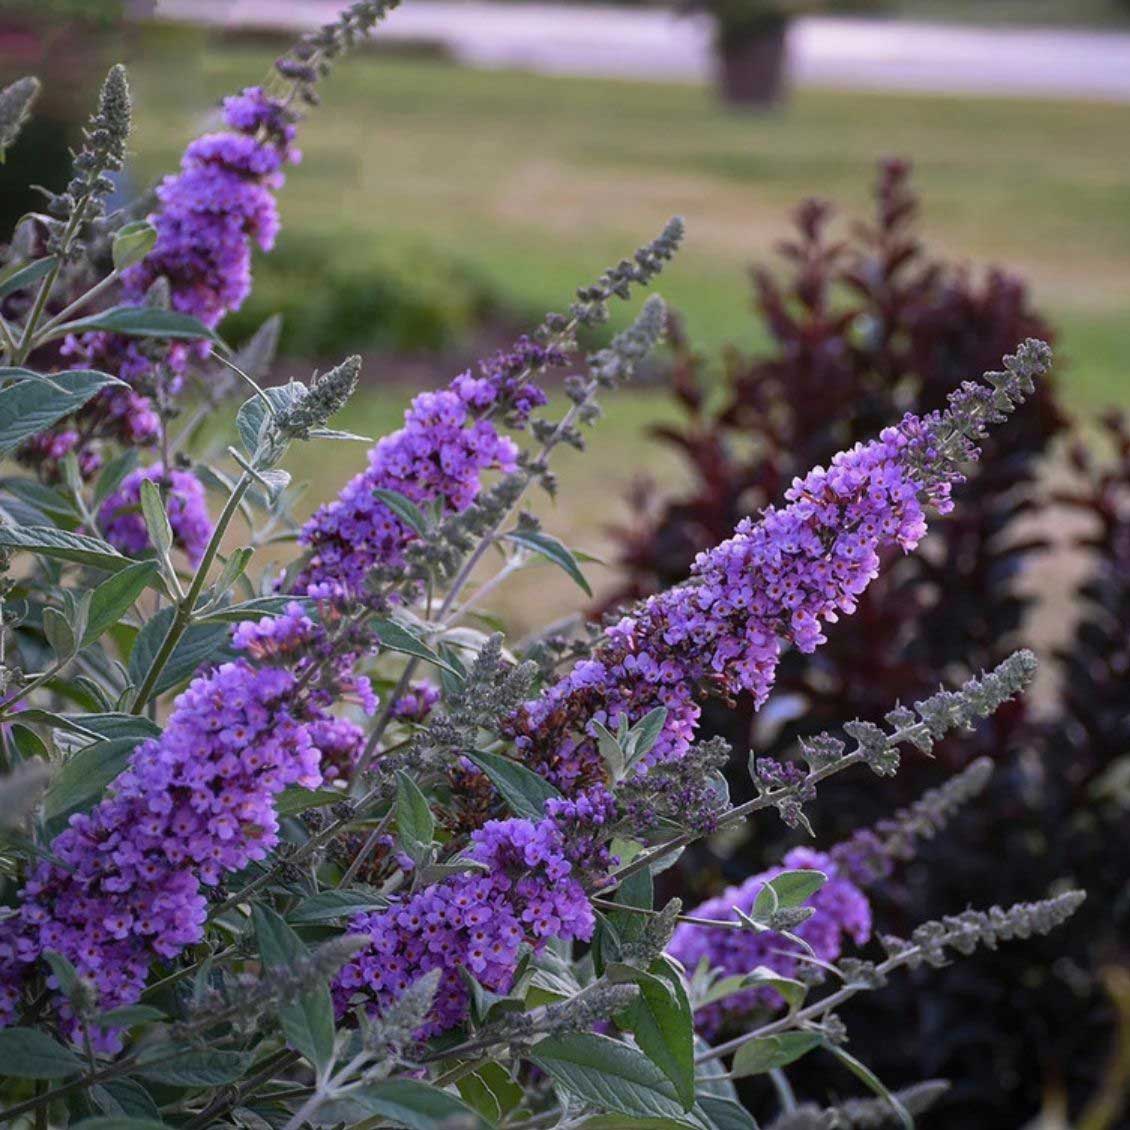 This sweet Buddleia will charm you with its extremely long, 12” light lavender purple flower panicles and a rounded, compact habit. 